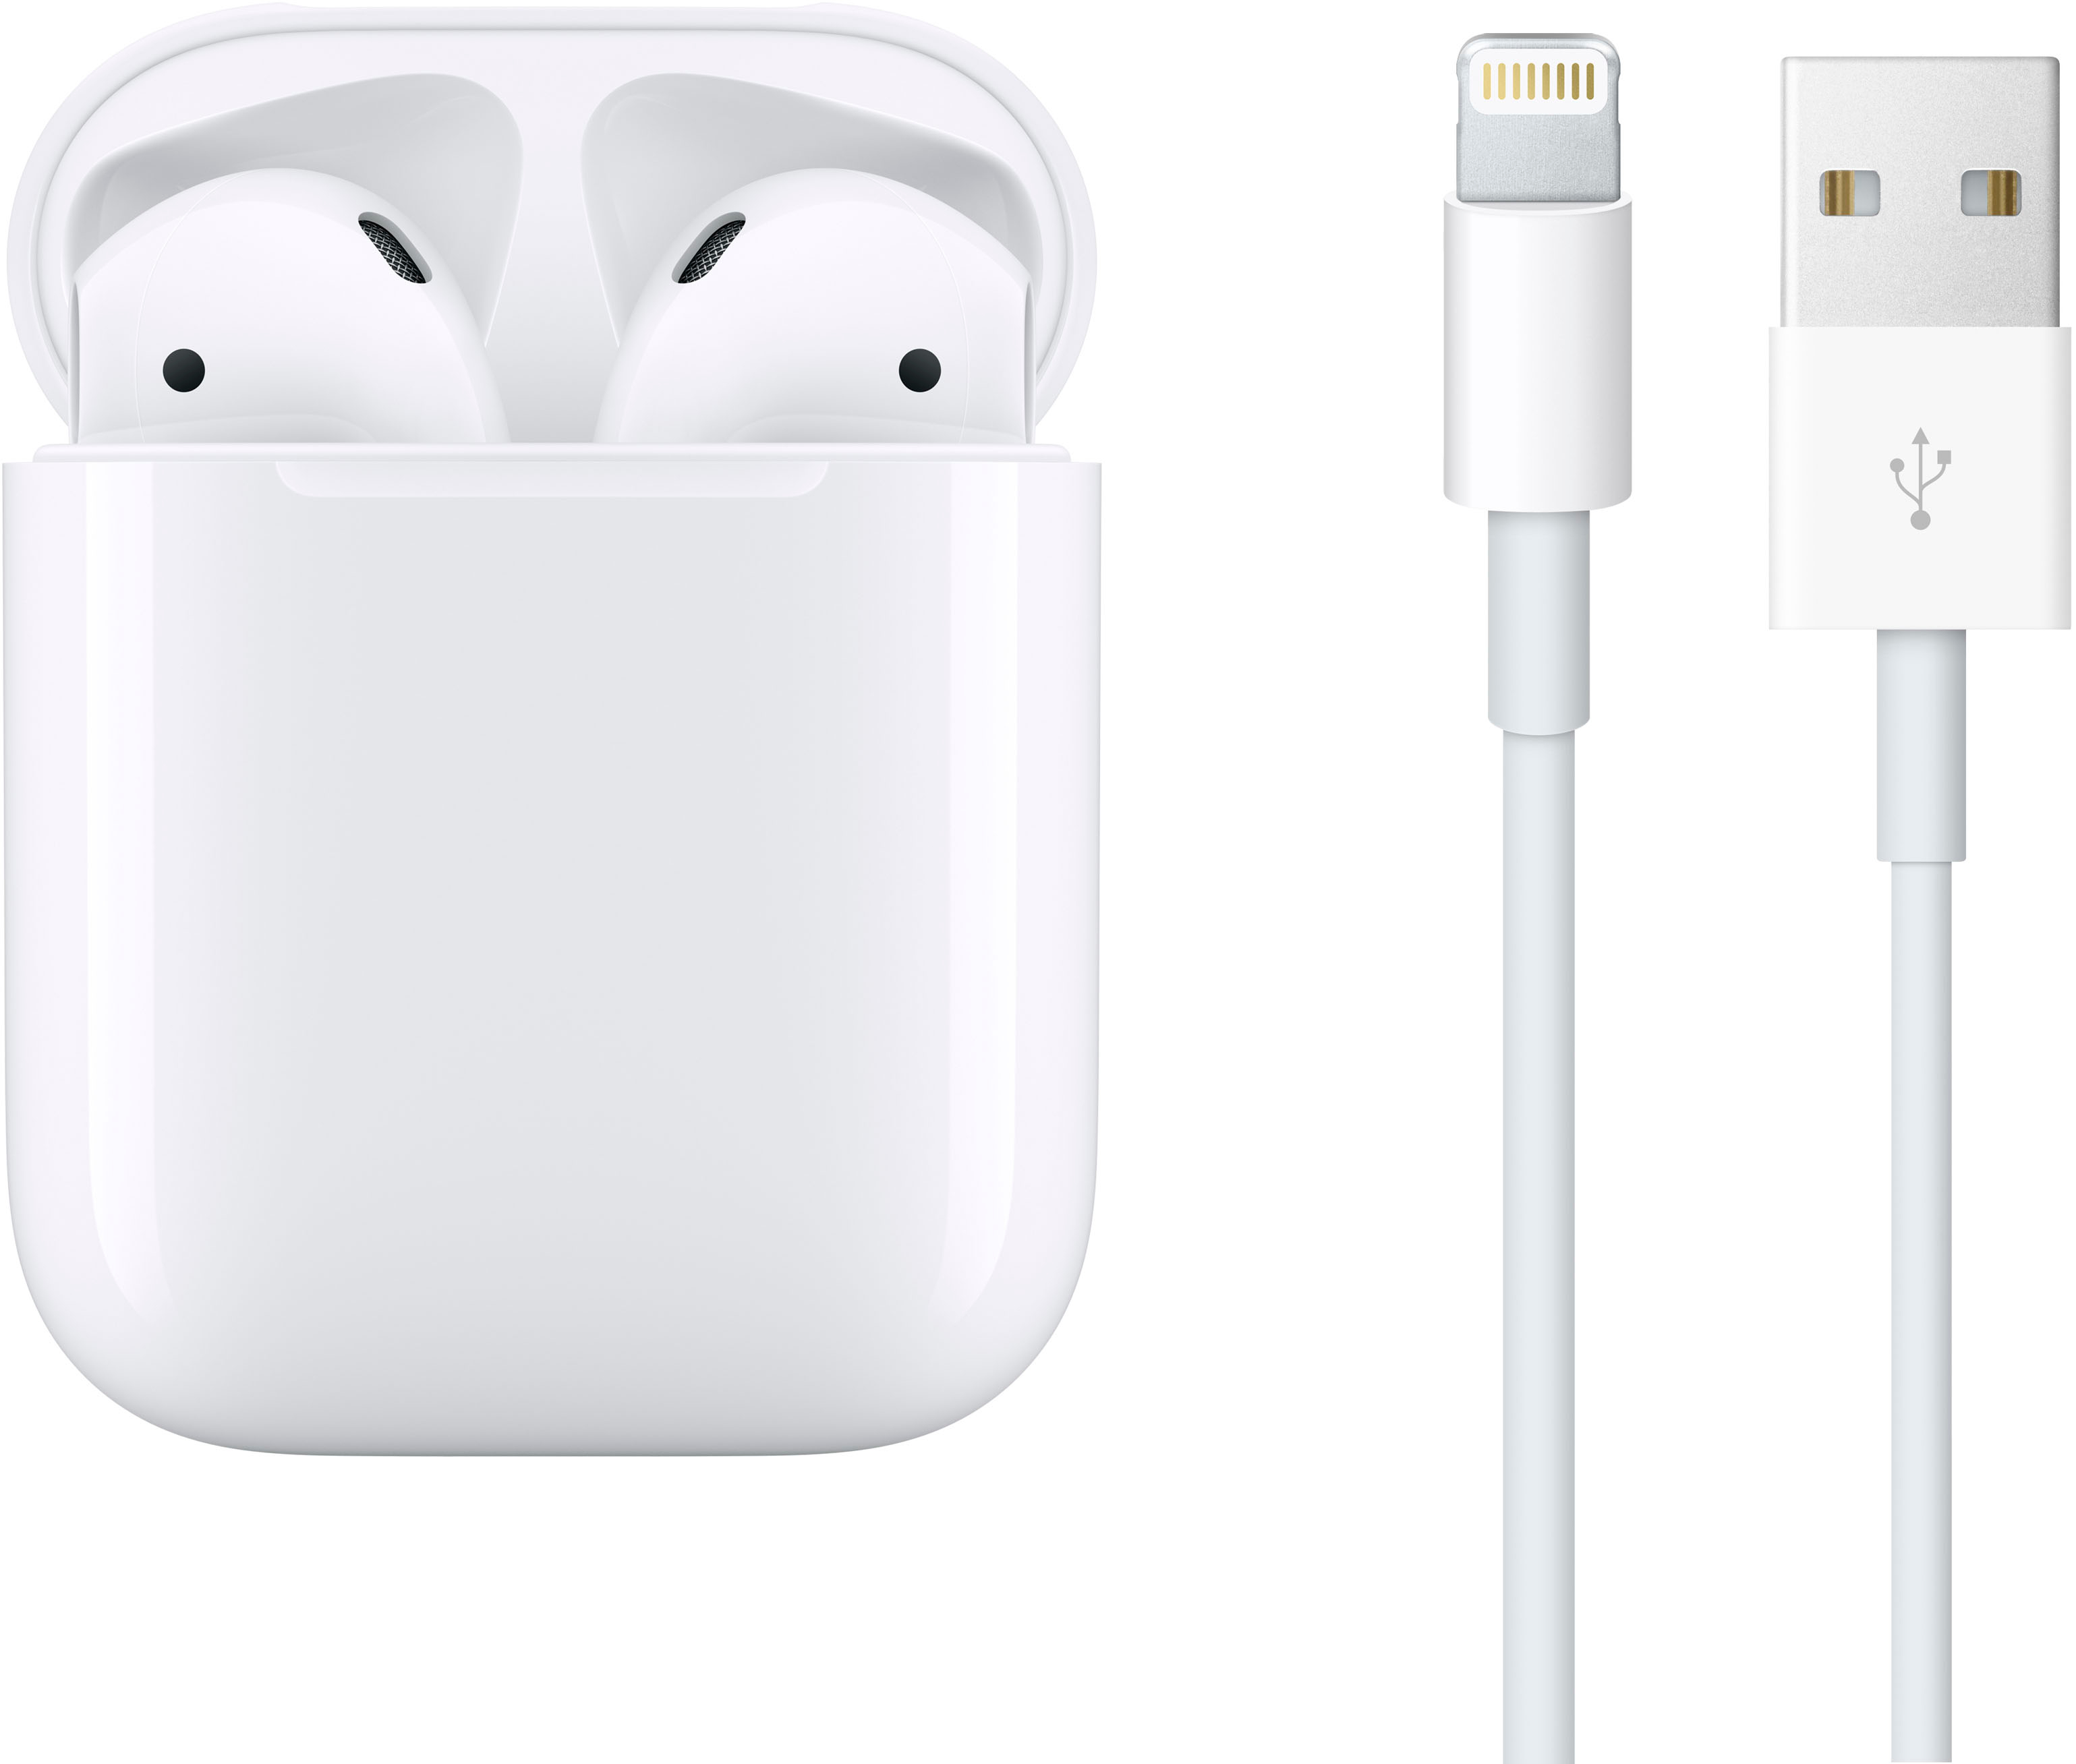 Around future socket Apple AirPods with Charging Case (2nd generation) White MV7N2AM/A - Best Buy